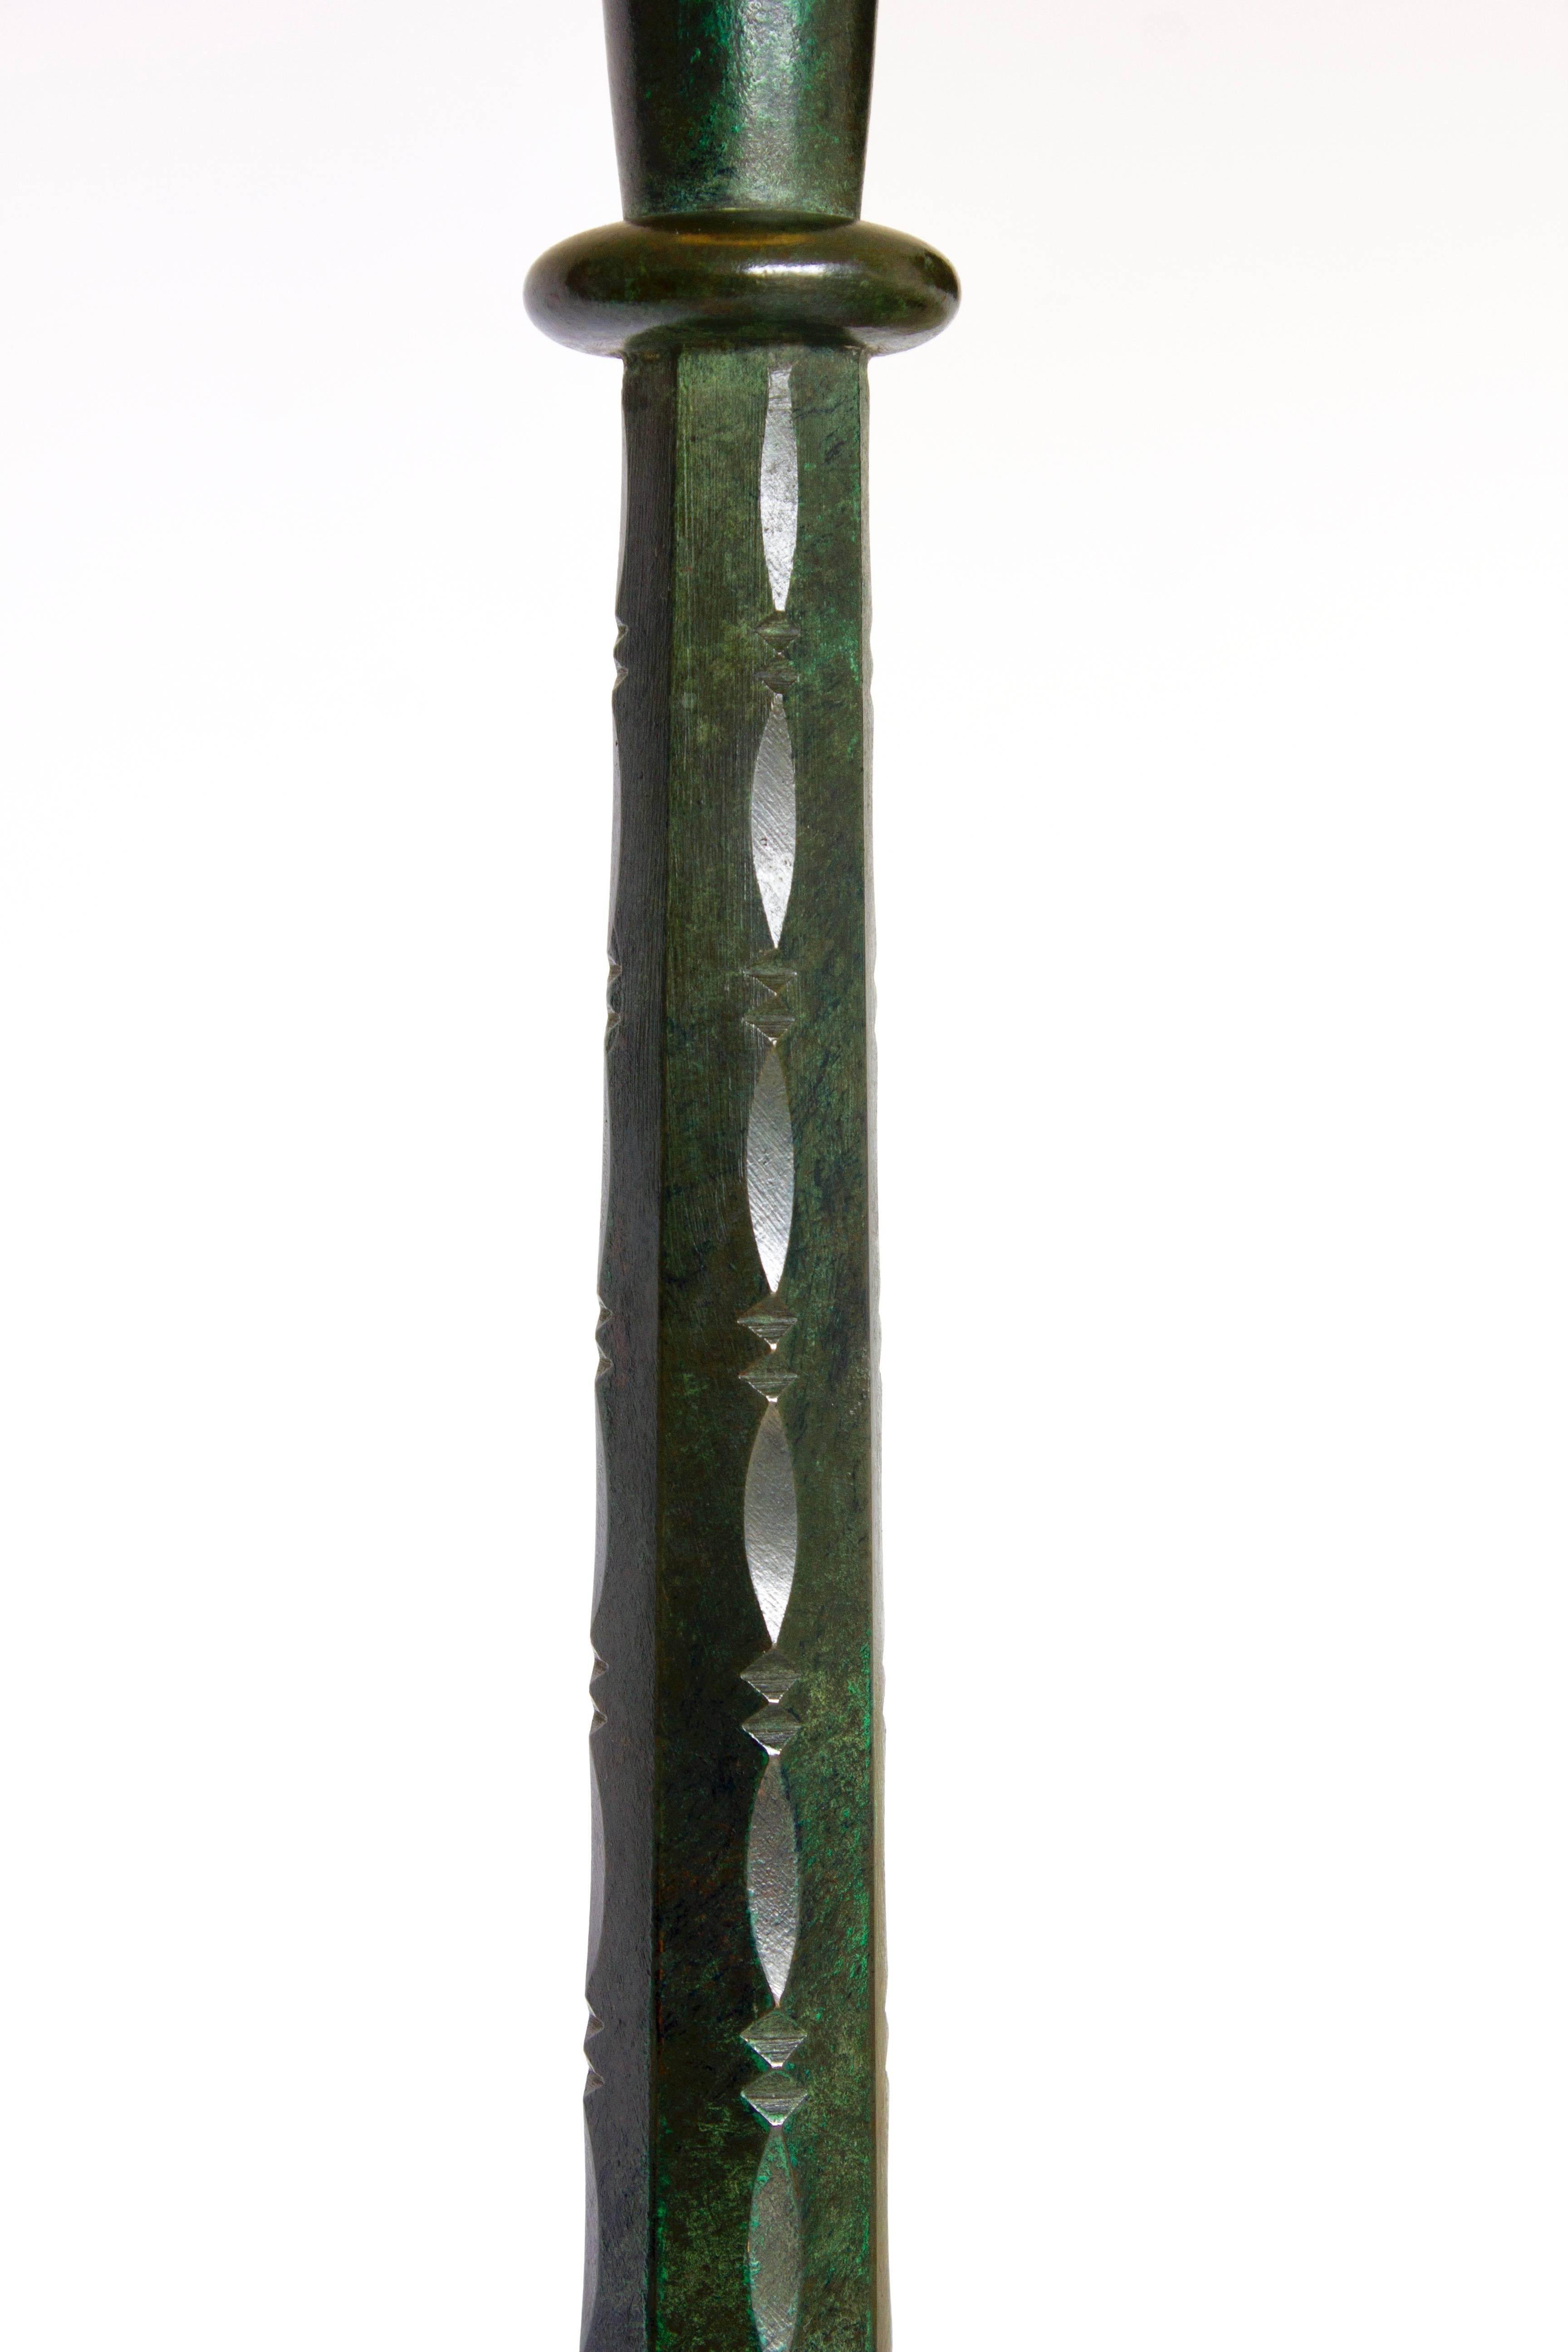 French Genet & Michon Chiseled Verdigris Patinated Bronze Floor Lamp, 1930 For Sale